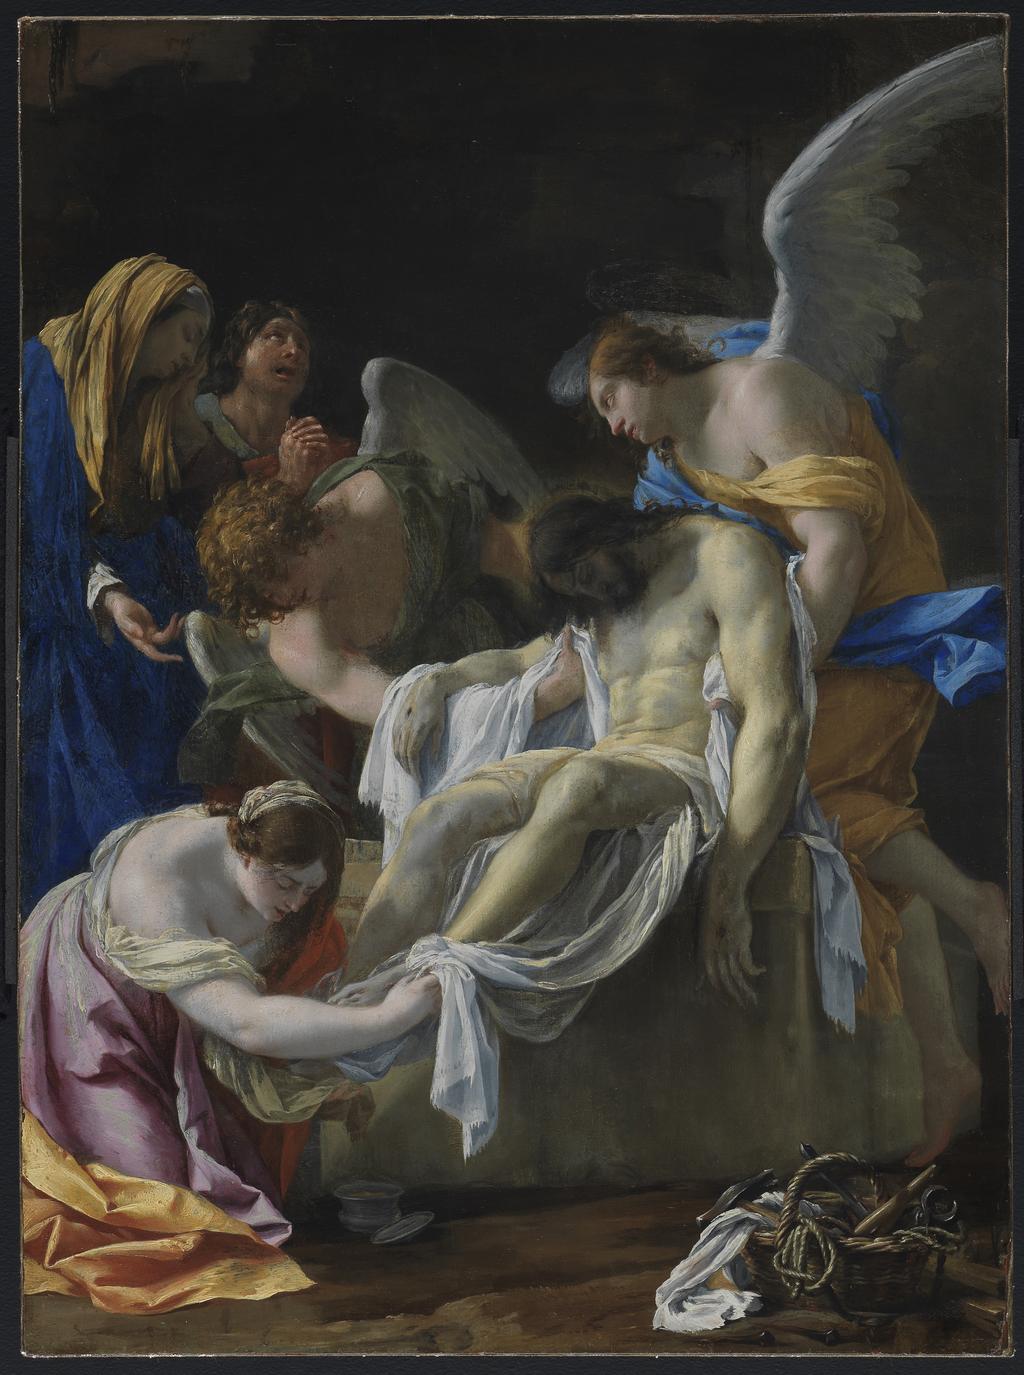 An image of The Entombment. Vouet, Simon (French, 1590-1649). Oil on panel, height, 56.5, cm, width, 41.5, cm, circa 1635-1638. Probable dates. Production Note: Possibly a modello for the painting commissioned by Pierre Seguier several versions of which are known, but of which the principal one generally is considered that in Epinal, Musée des Beaux-Arts (no. 32).